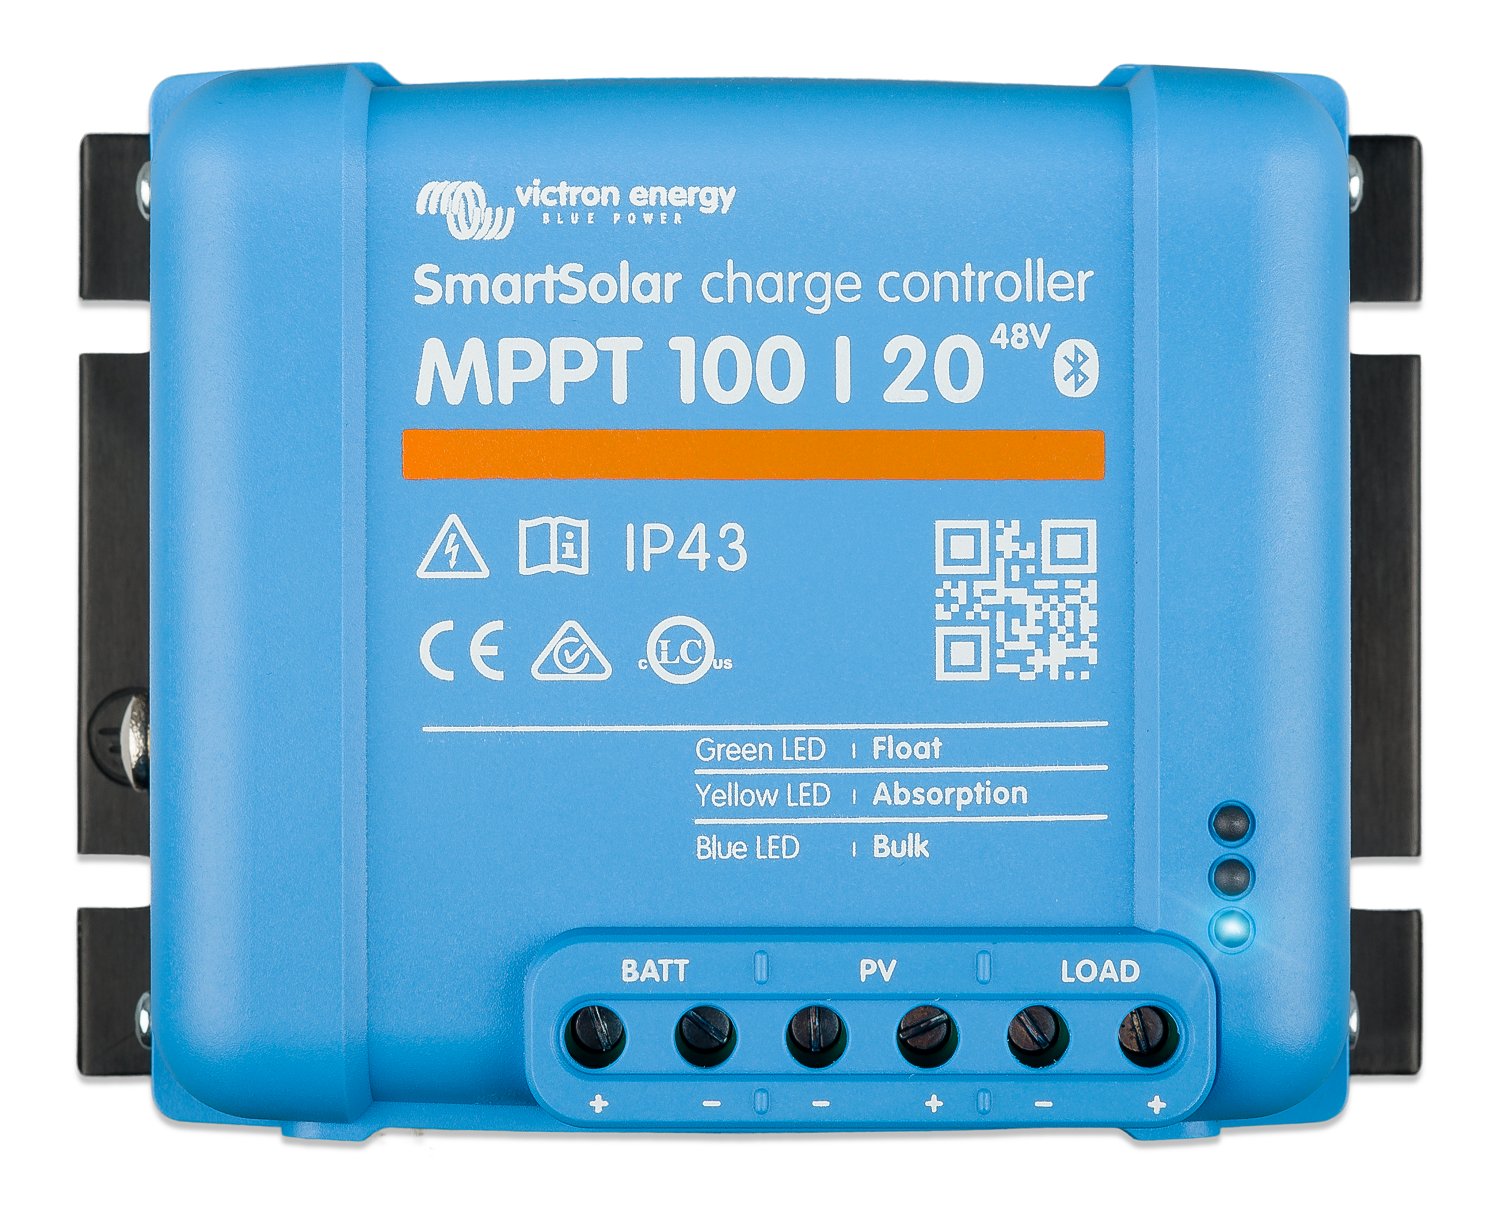 What do the lights mean on the MPPT solar charge controller?